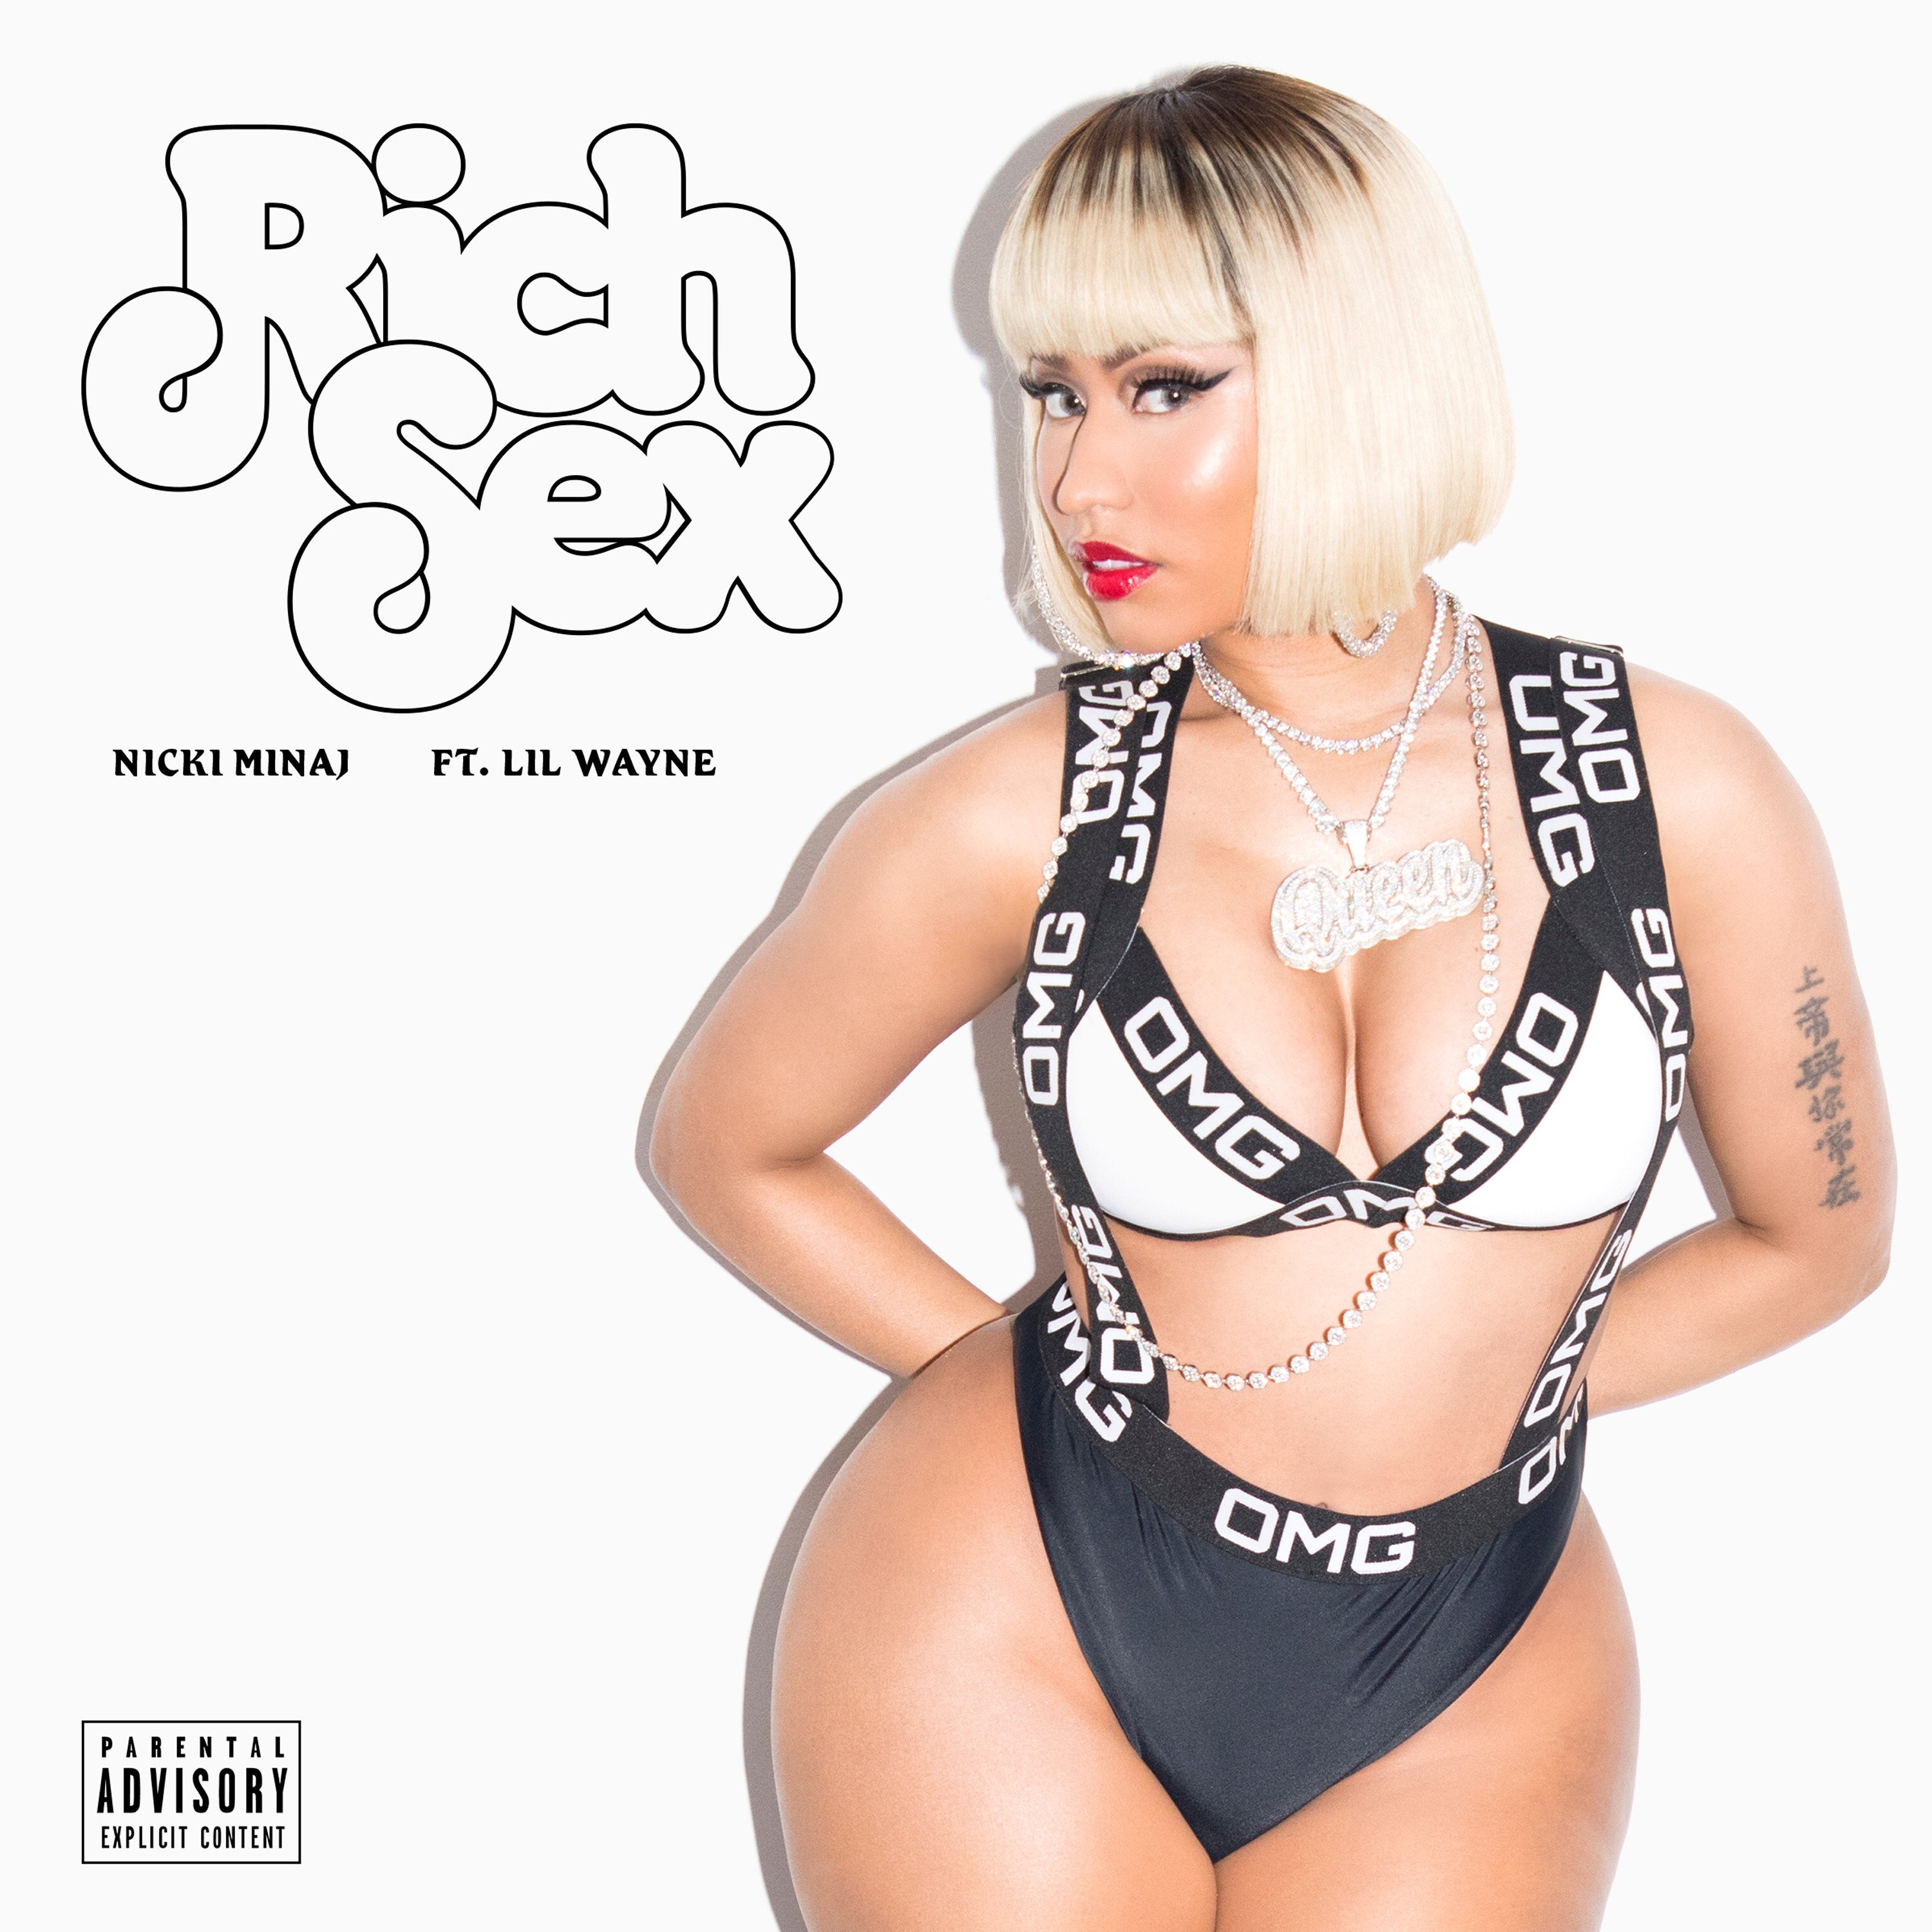 Nicki Minaj and Sexxy Red search for the Hoochie Daddies on